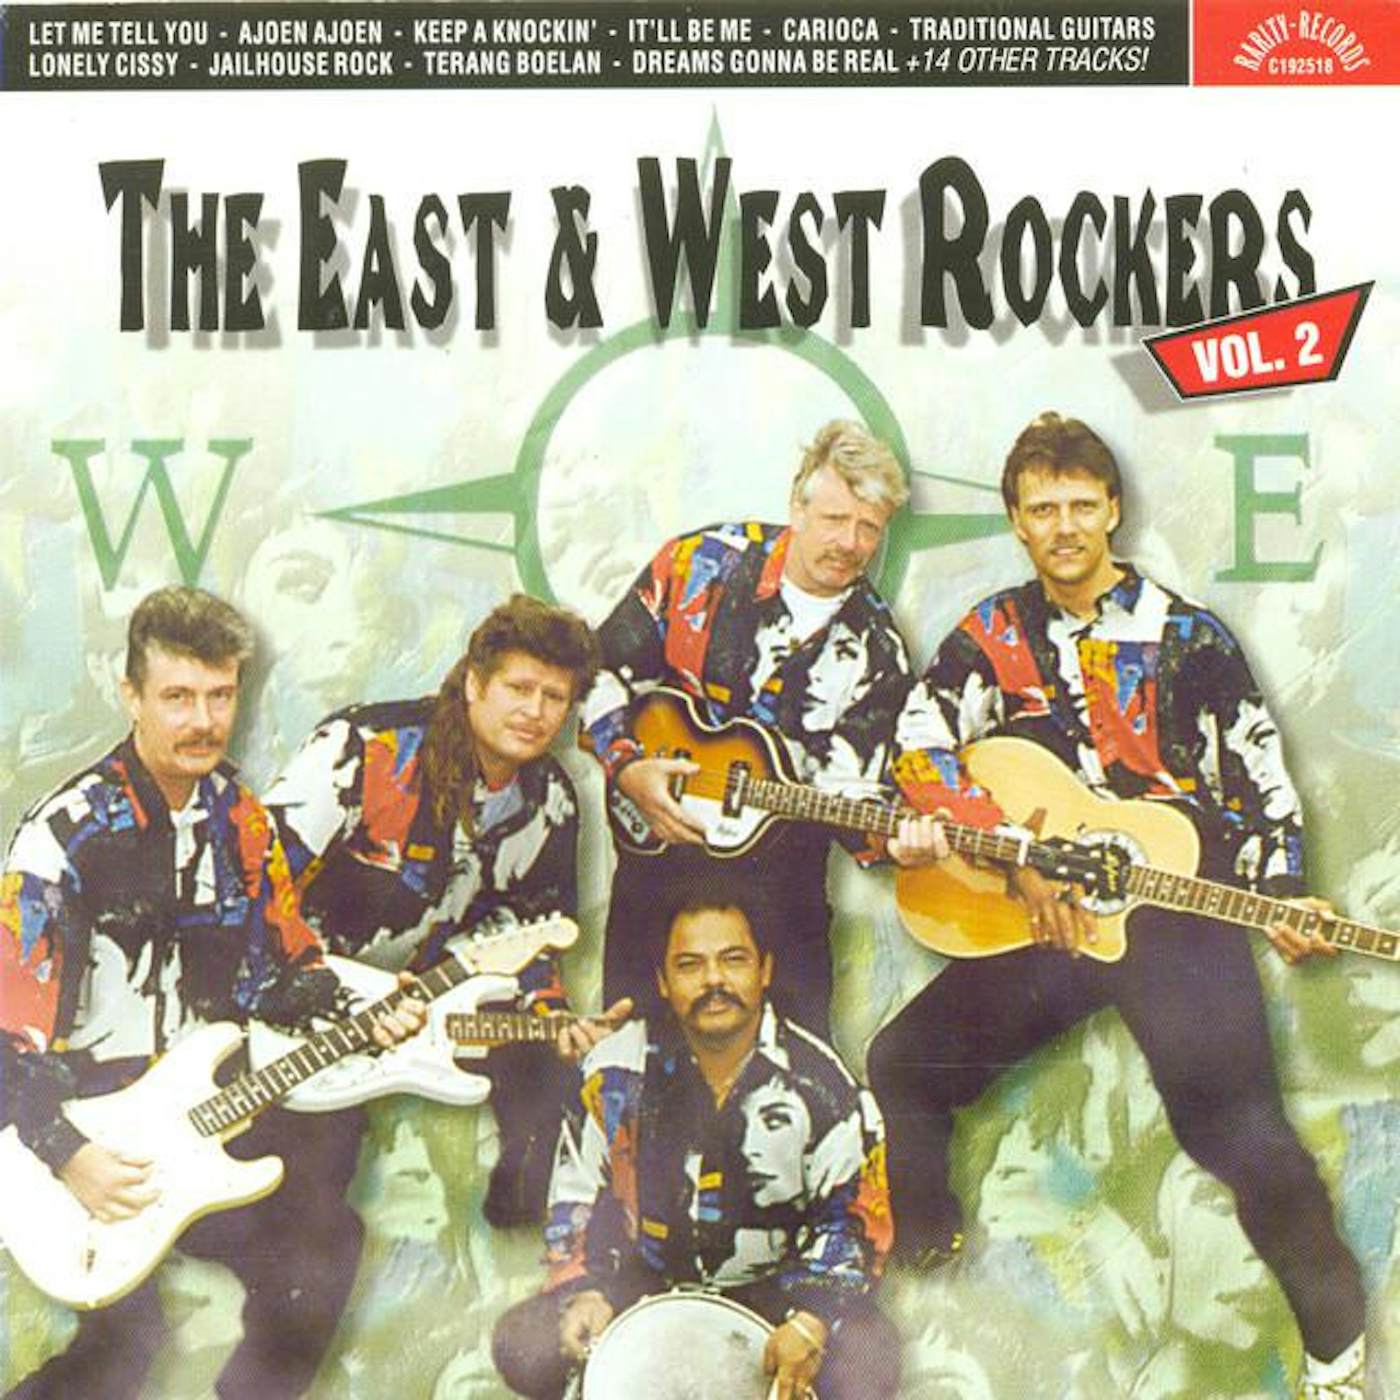 The East & West Rockers